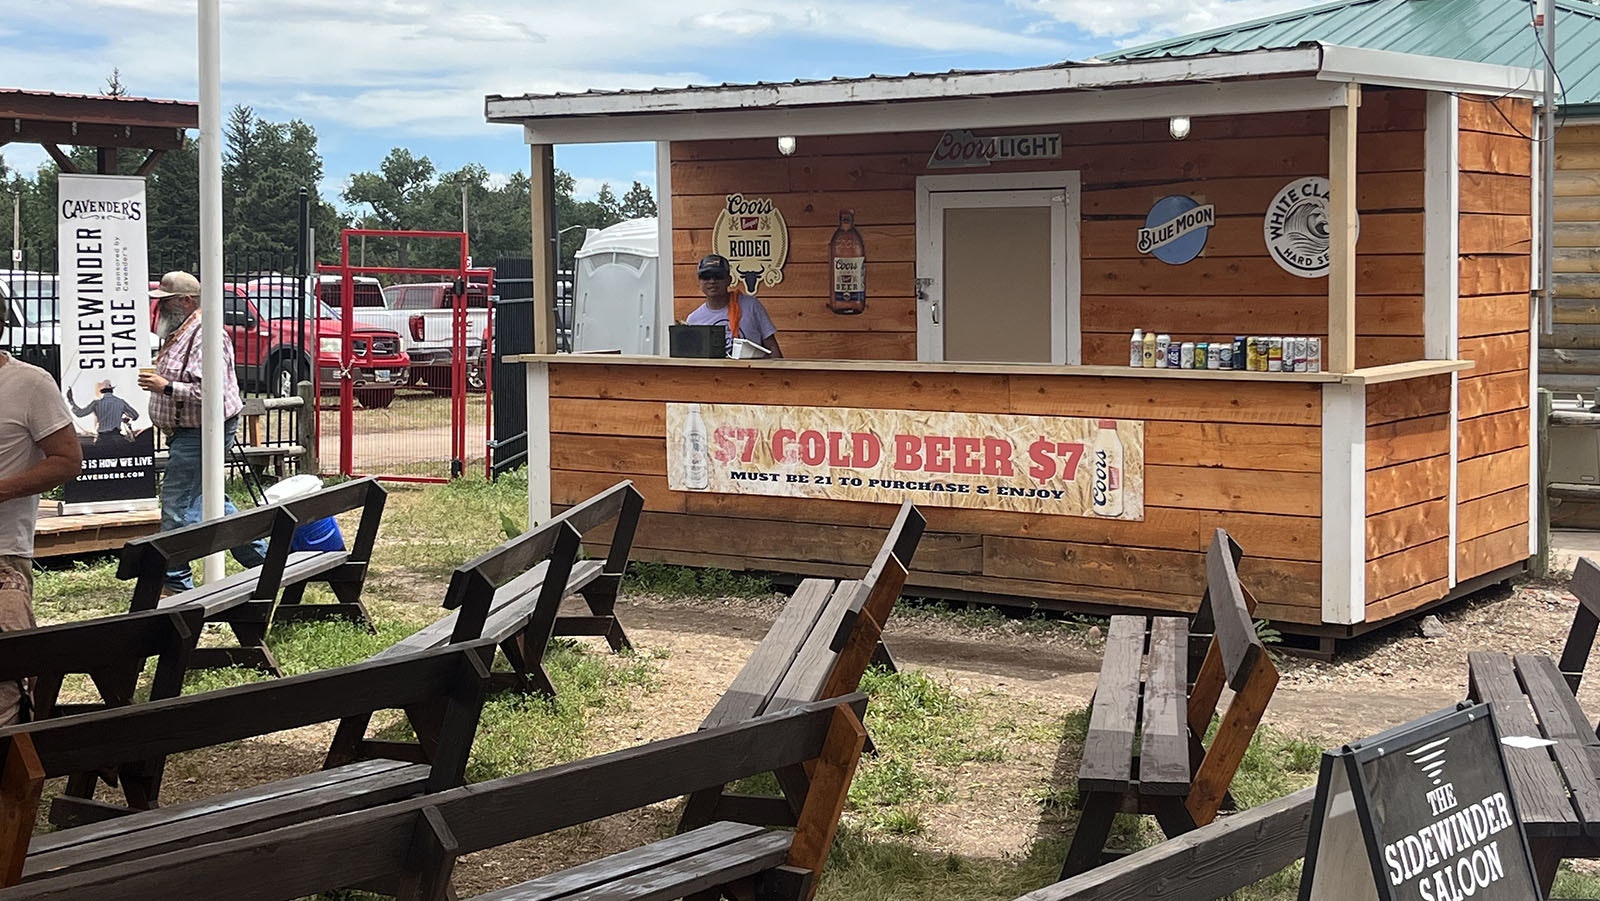 At $7 a cup, beer is one of the more inexpensive food items at Cheyenne Frontier Days.